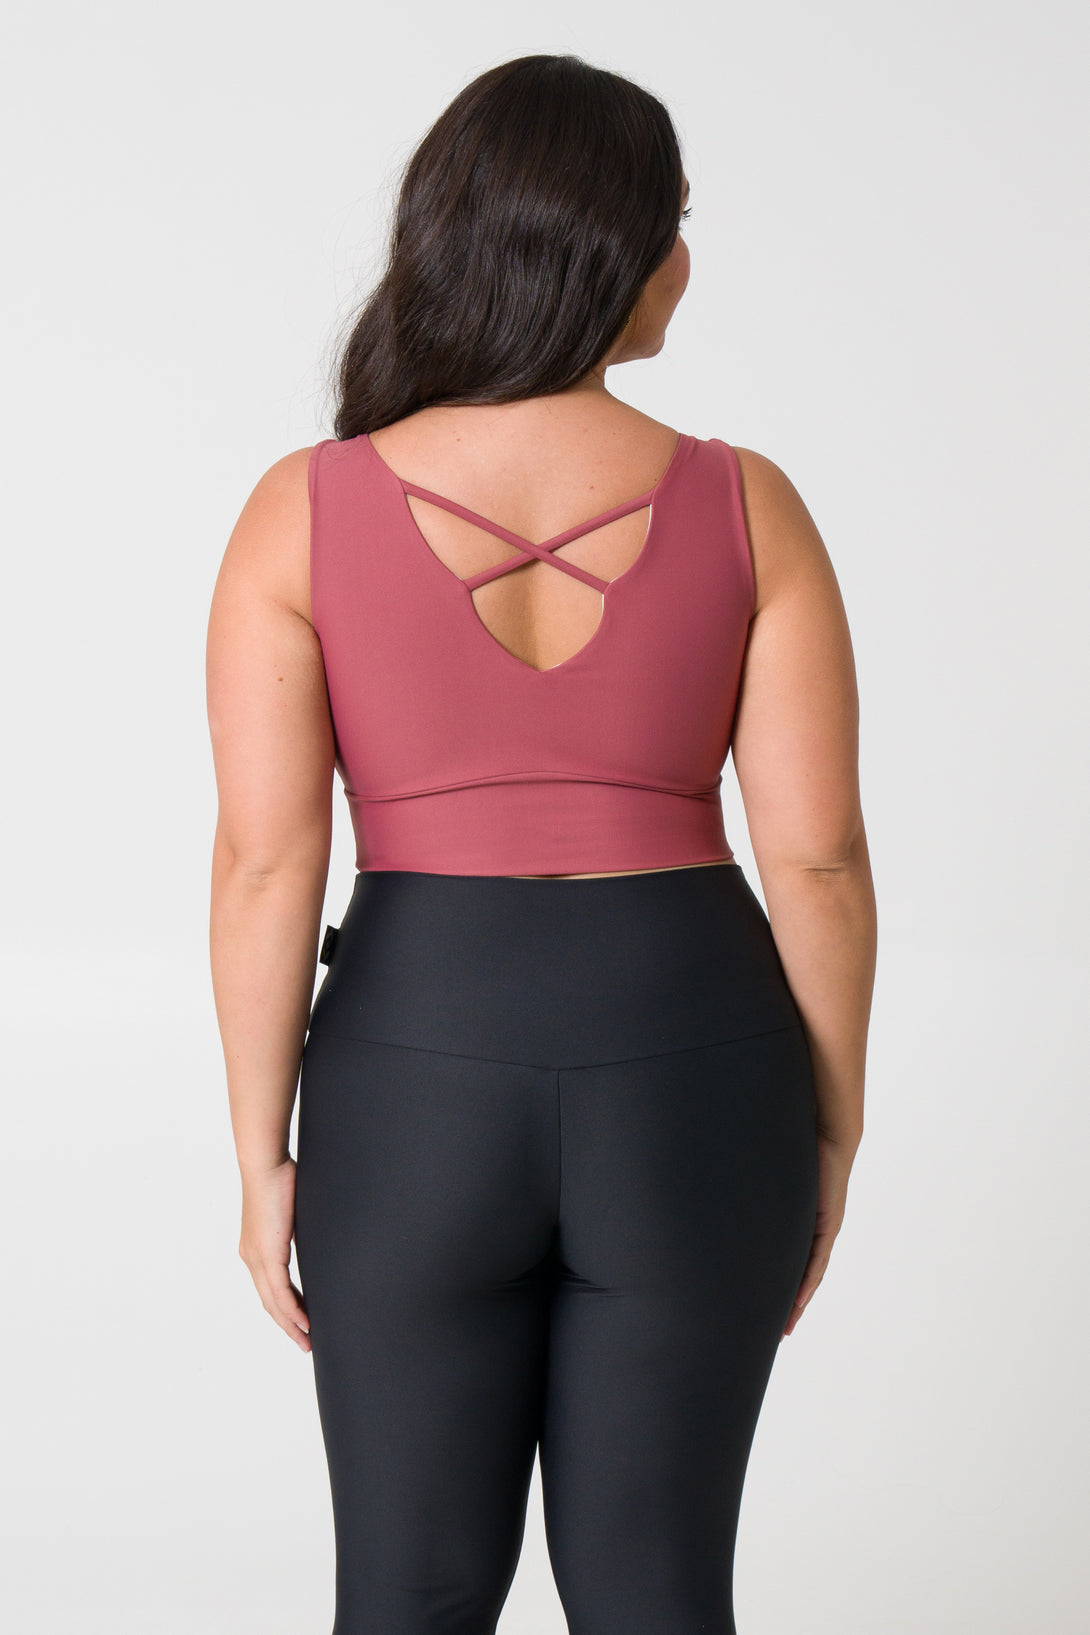 Blush reversible comfort crop top, designed for active women who seek both functionality and fashion.